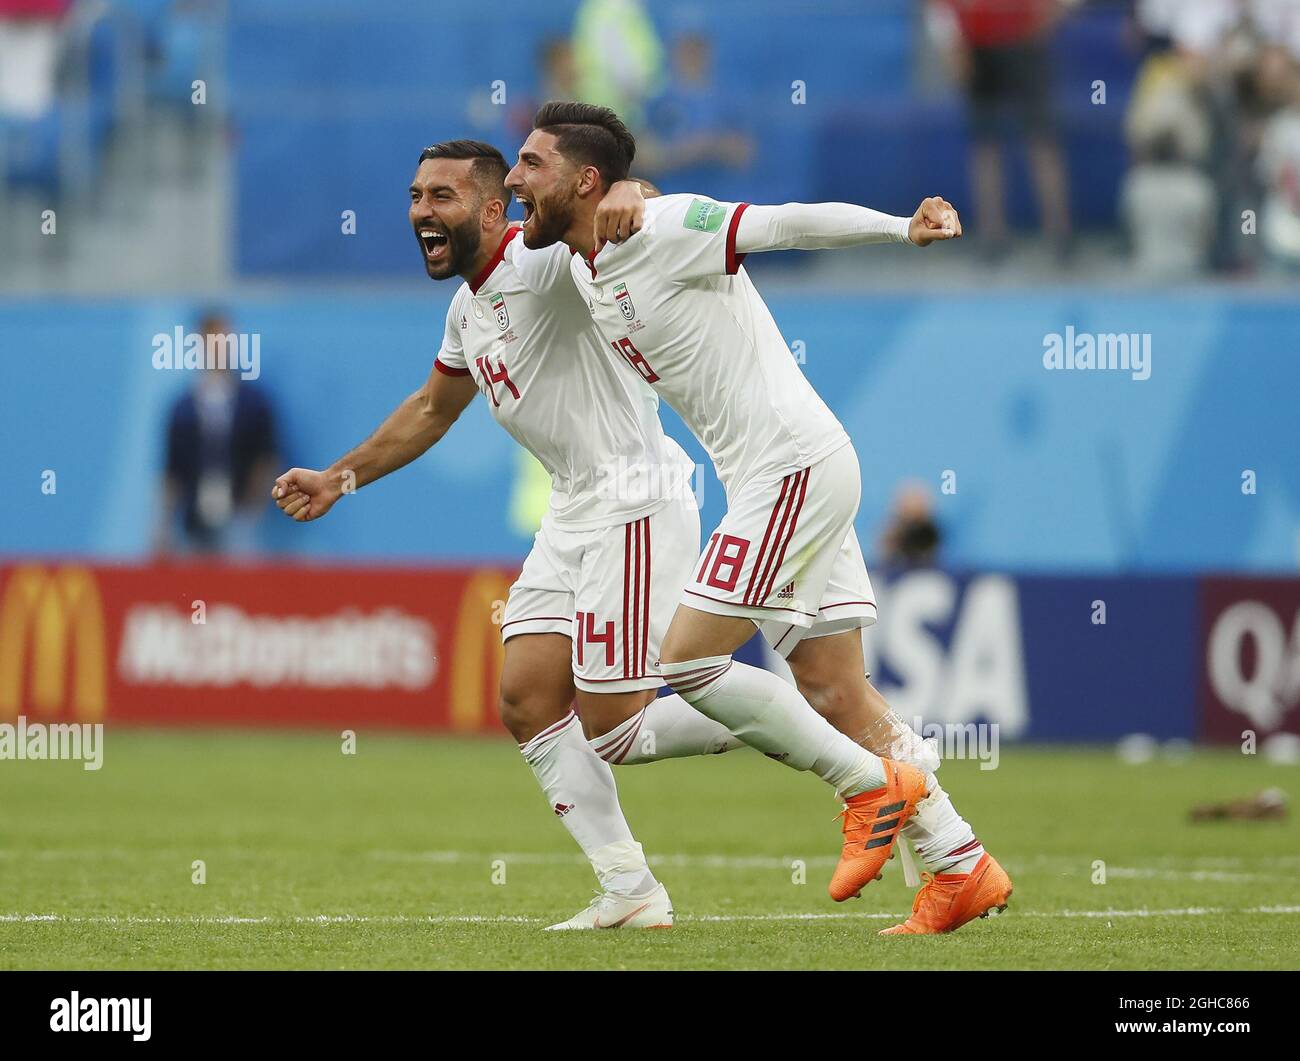 Saman Ghoddos of IR Iran and Alireza Jahanbakhsh of IR Iran celebrate the win during the FIFA World Cup 2018 Group B match at the St Petersburg Stadium, St Petersburg. Picture date 15th June 2018. Picture credit should read: David Klein/Sportimage via PA Images Stock Photo